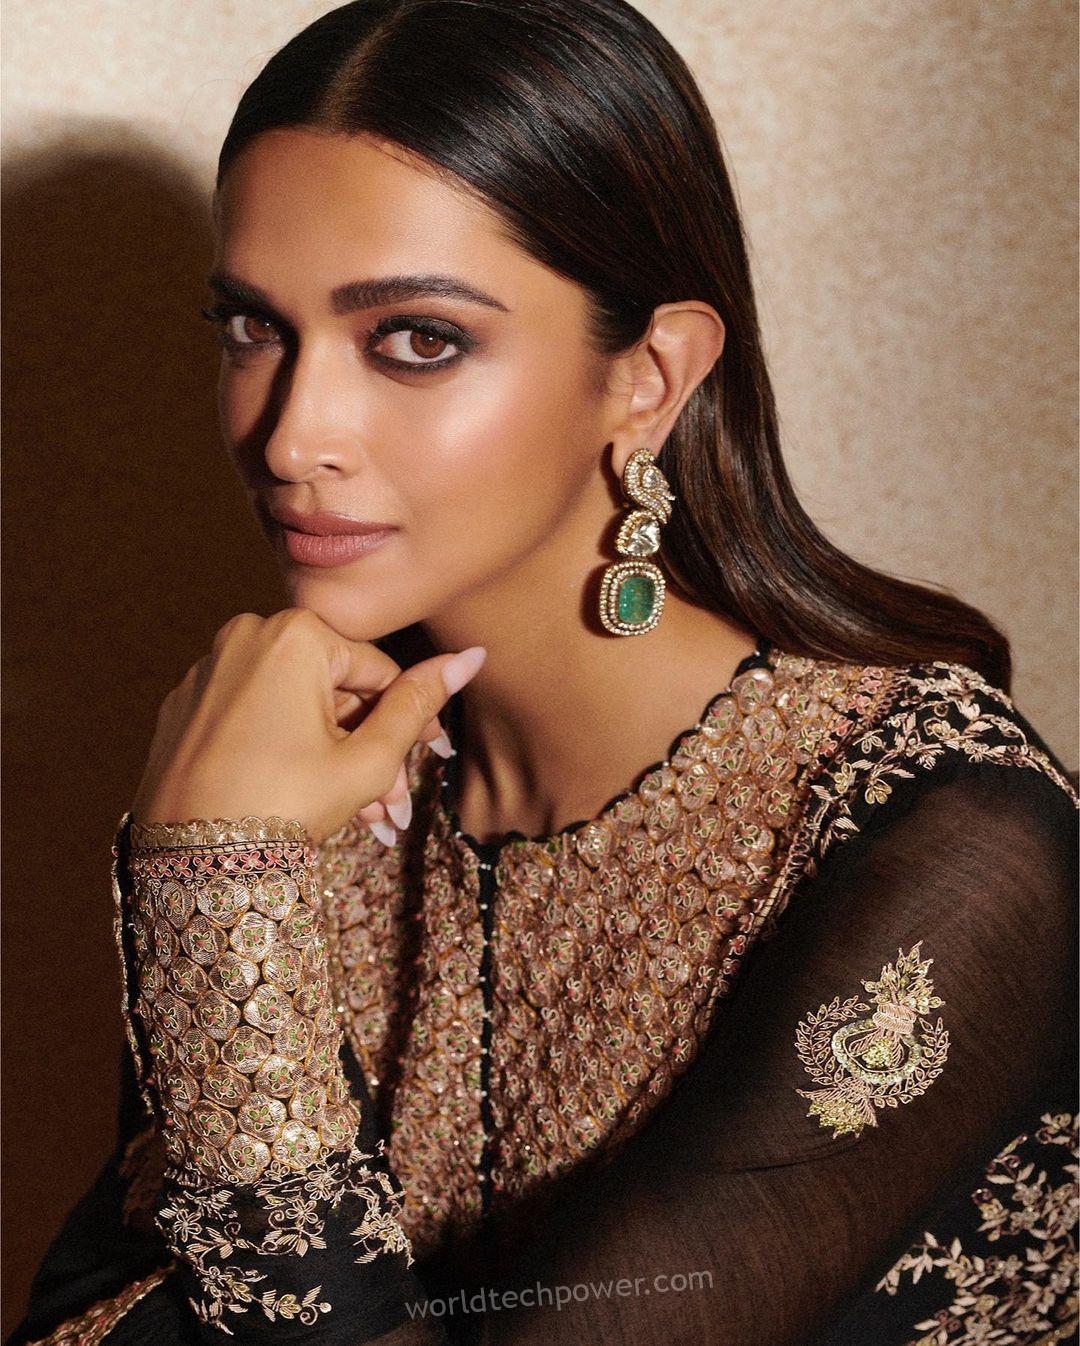 354614230 851952959606056 333039963608276484 n – 5 Instances Deepika Padukone Notched Her Outfit Up By Gorgeous Earrings – World Tech Power